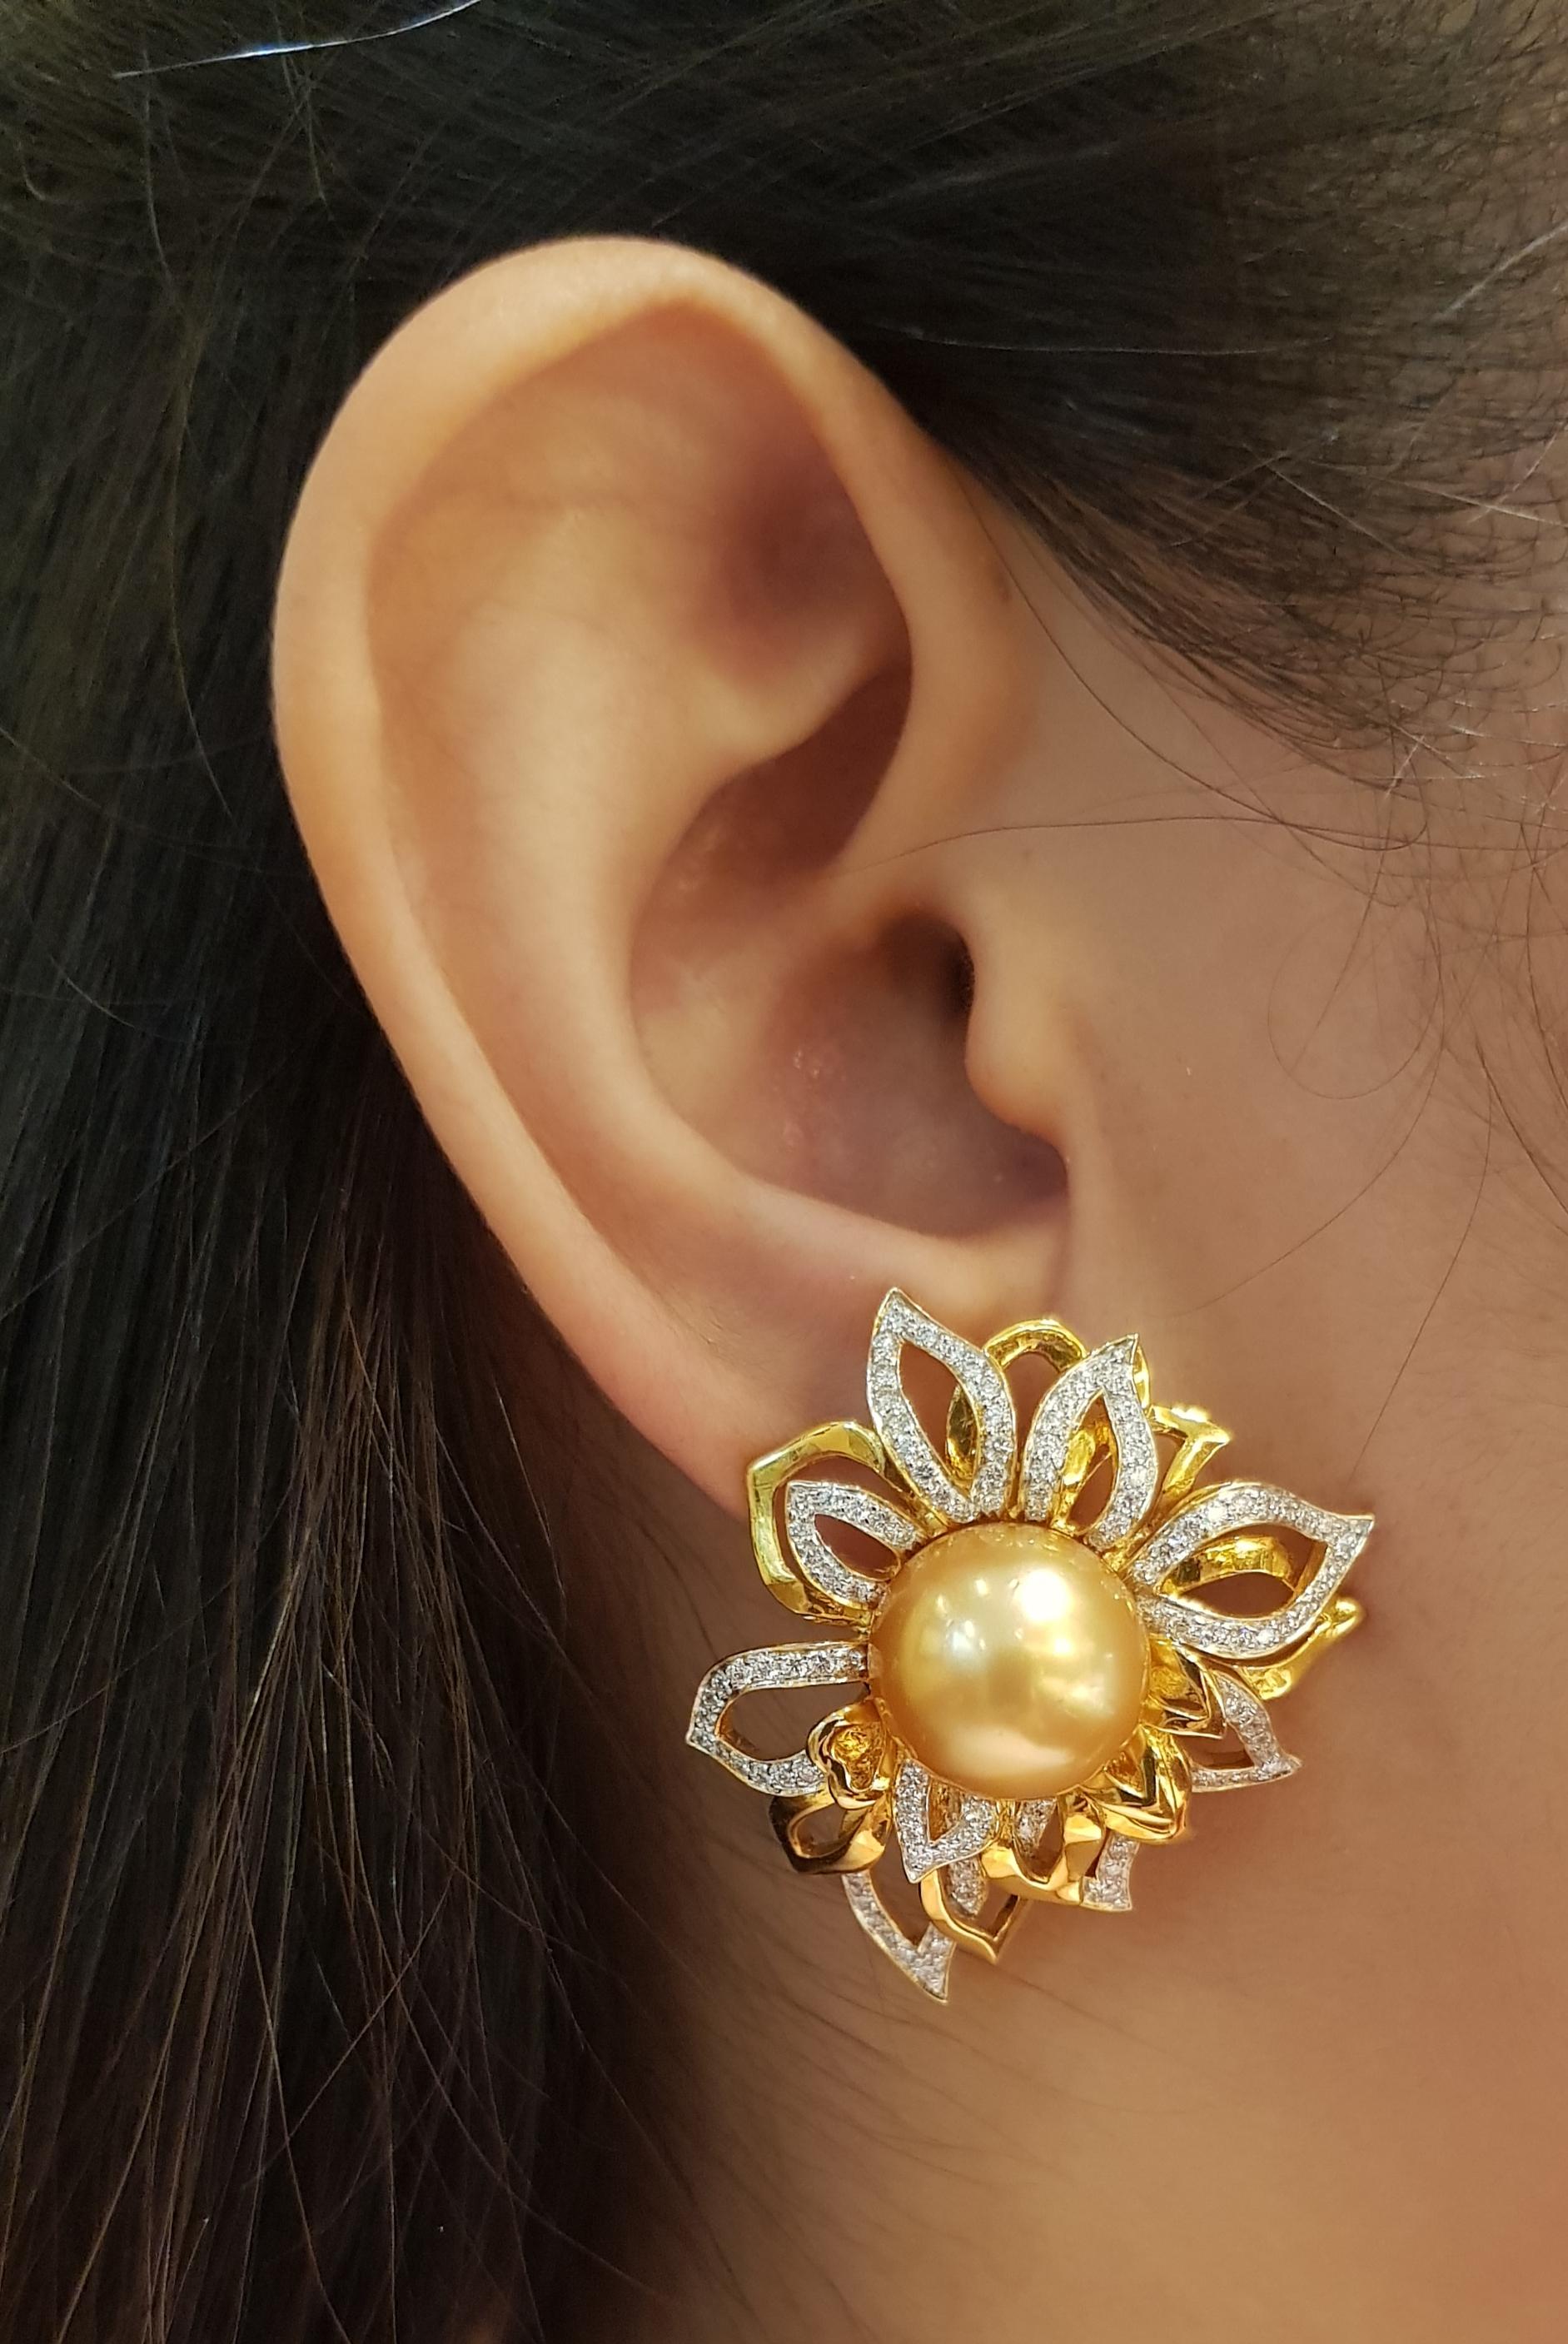 South Sea Pearl with Diamond 1.50 carats Earrings set in 18 Karat Gold Settings

Width:  3.2 cm 
Length:  3.7 cm
Total Weight: 31.08grams

